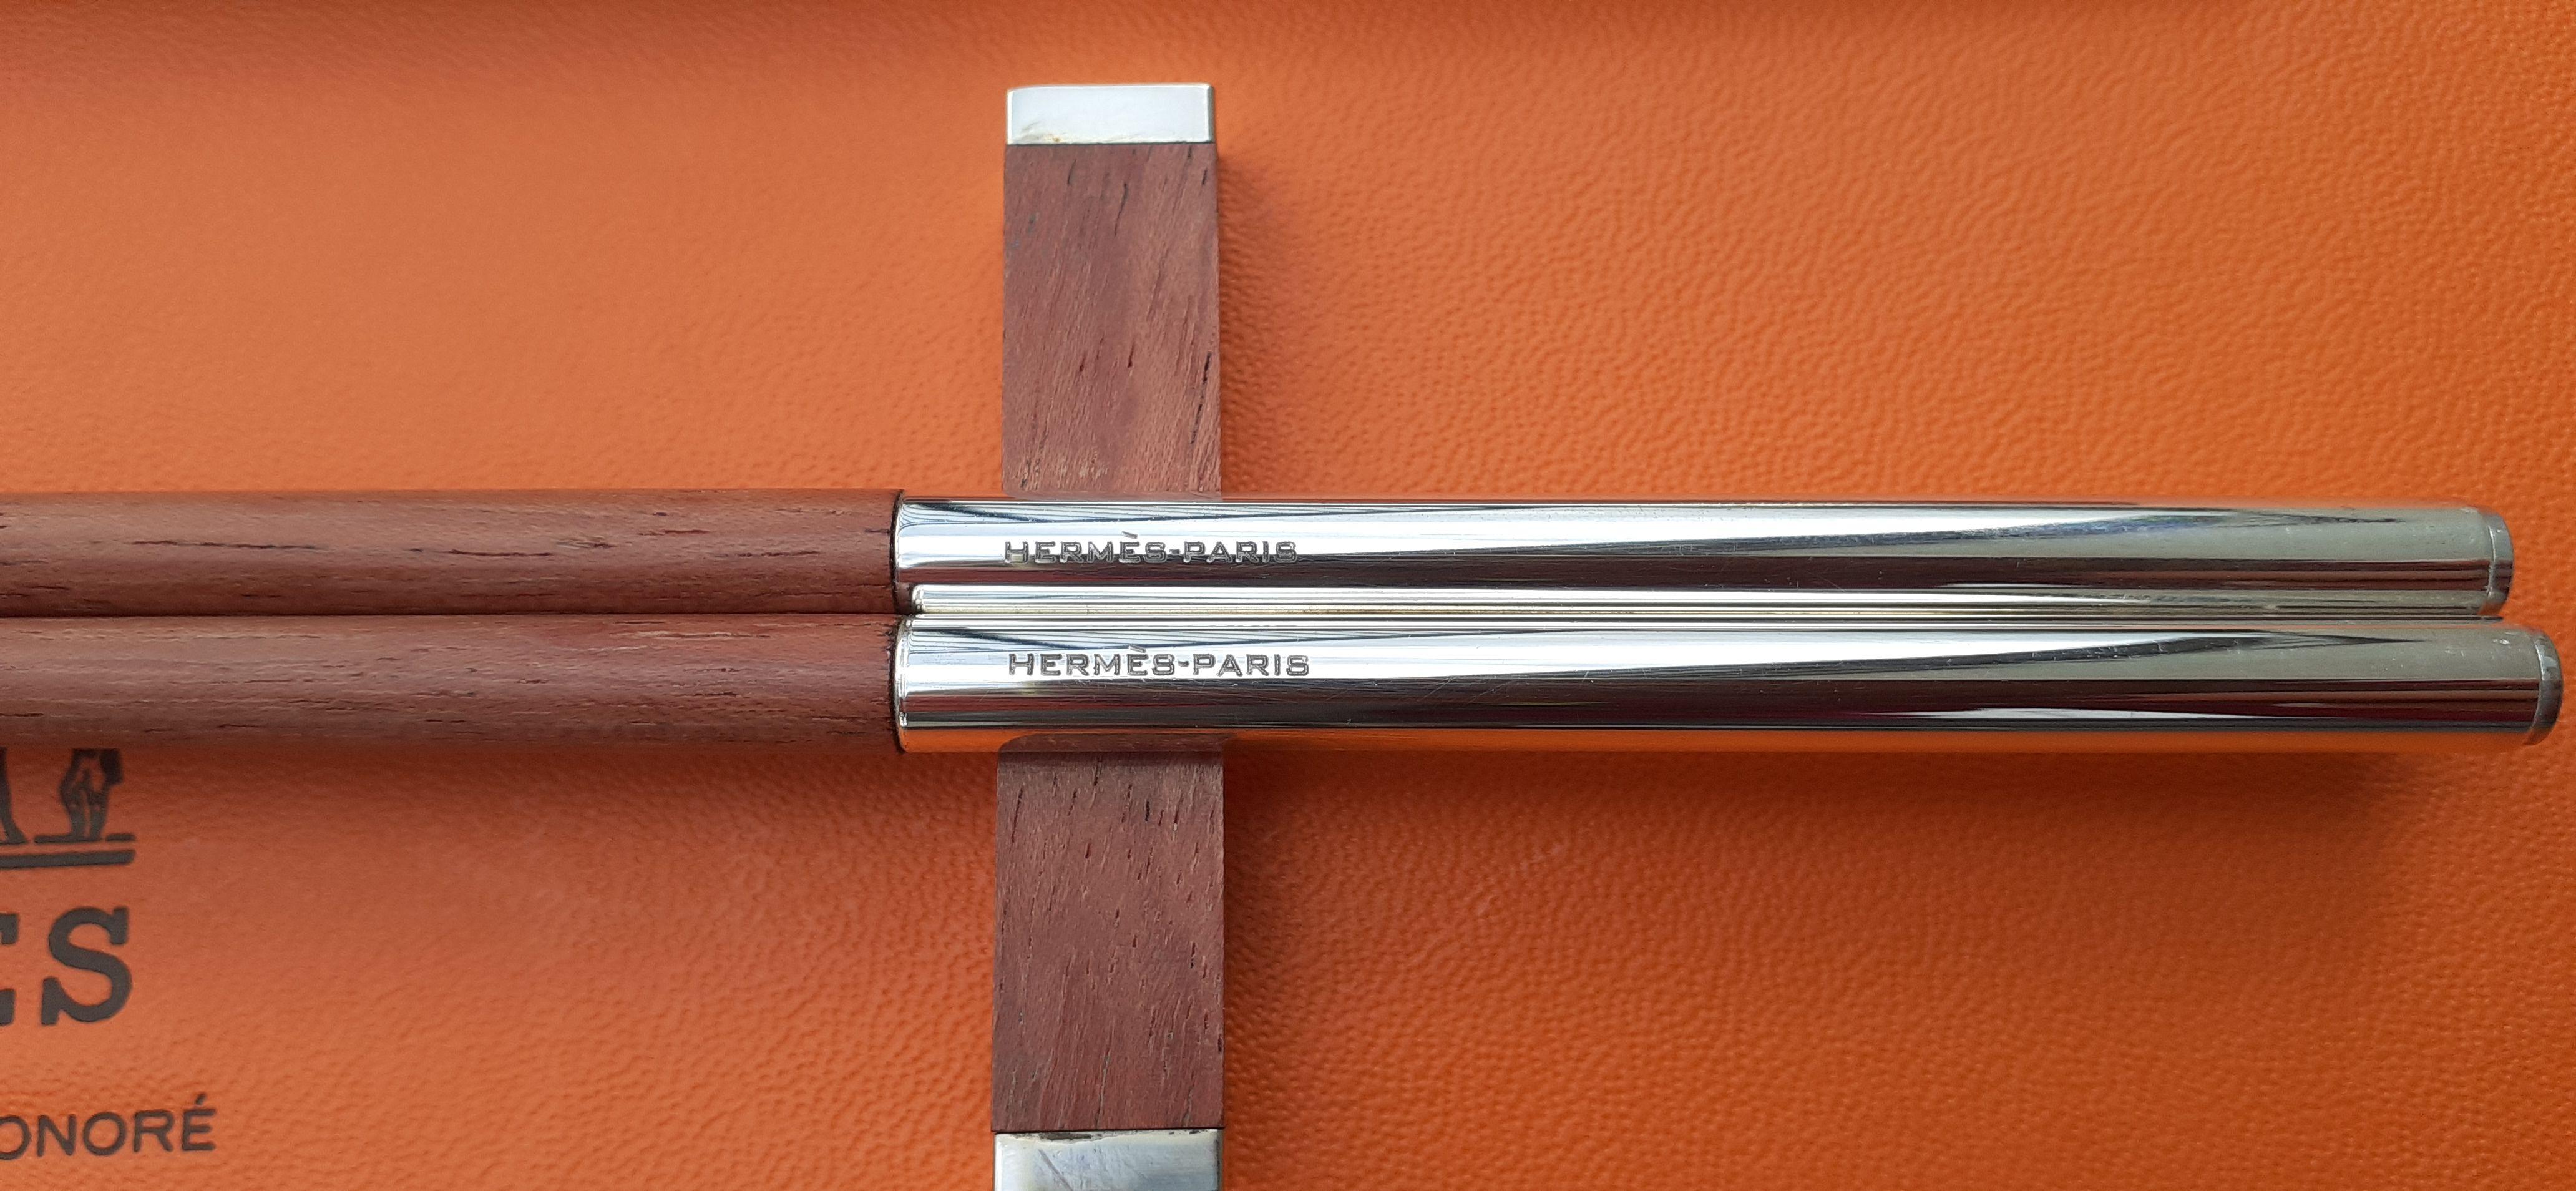 Exceptional Hermès Set of 2 pairs of Chopsticks in wood For Sale 4